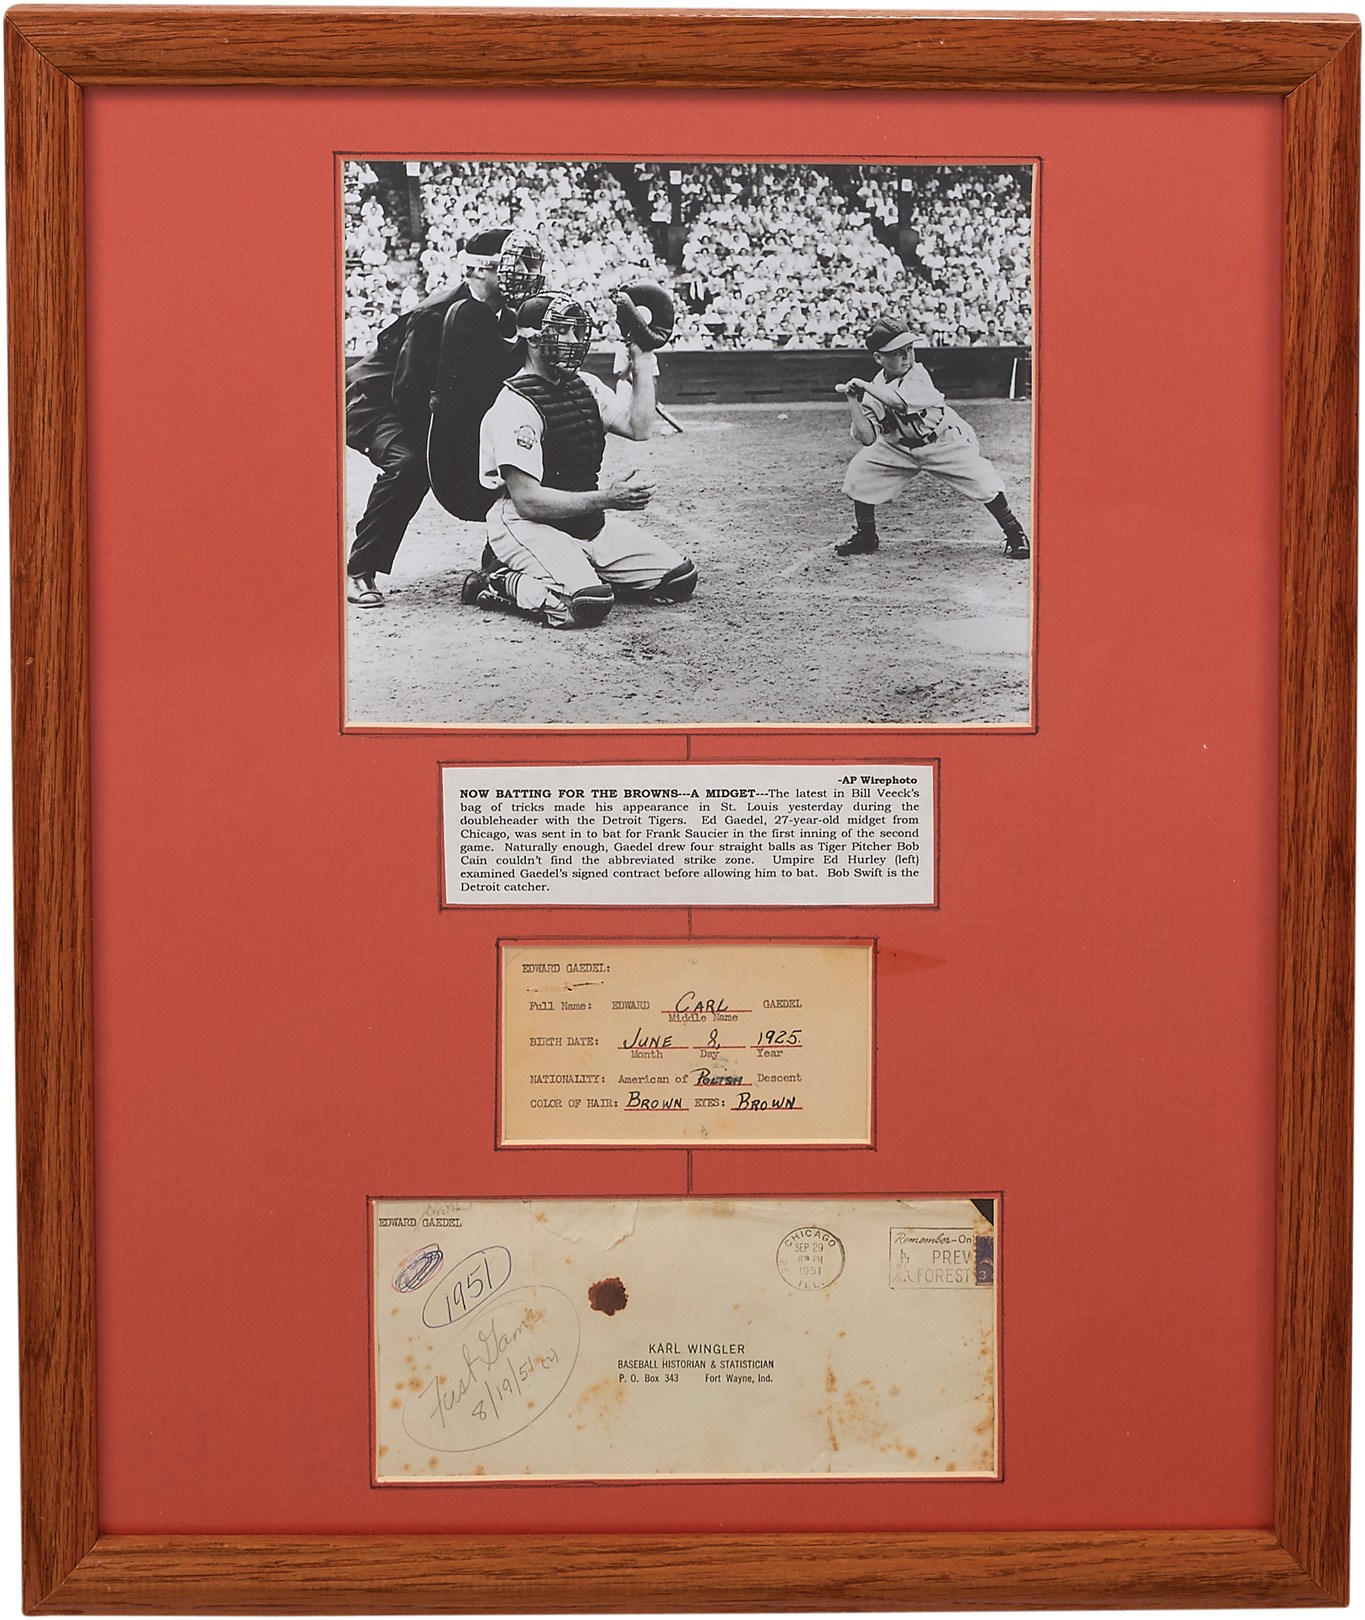 - 1951 Eddie Gaedel Handwritten Questionnaire - Month After Historic Plate Appearance (PSA)